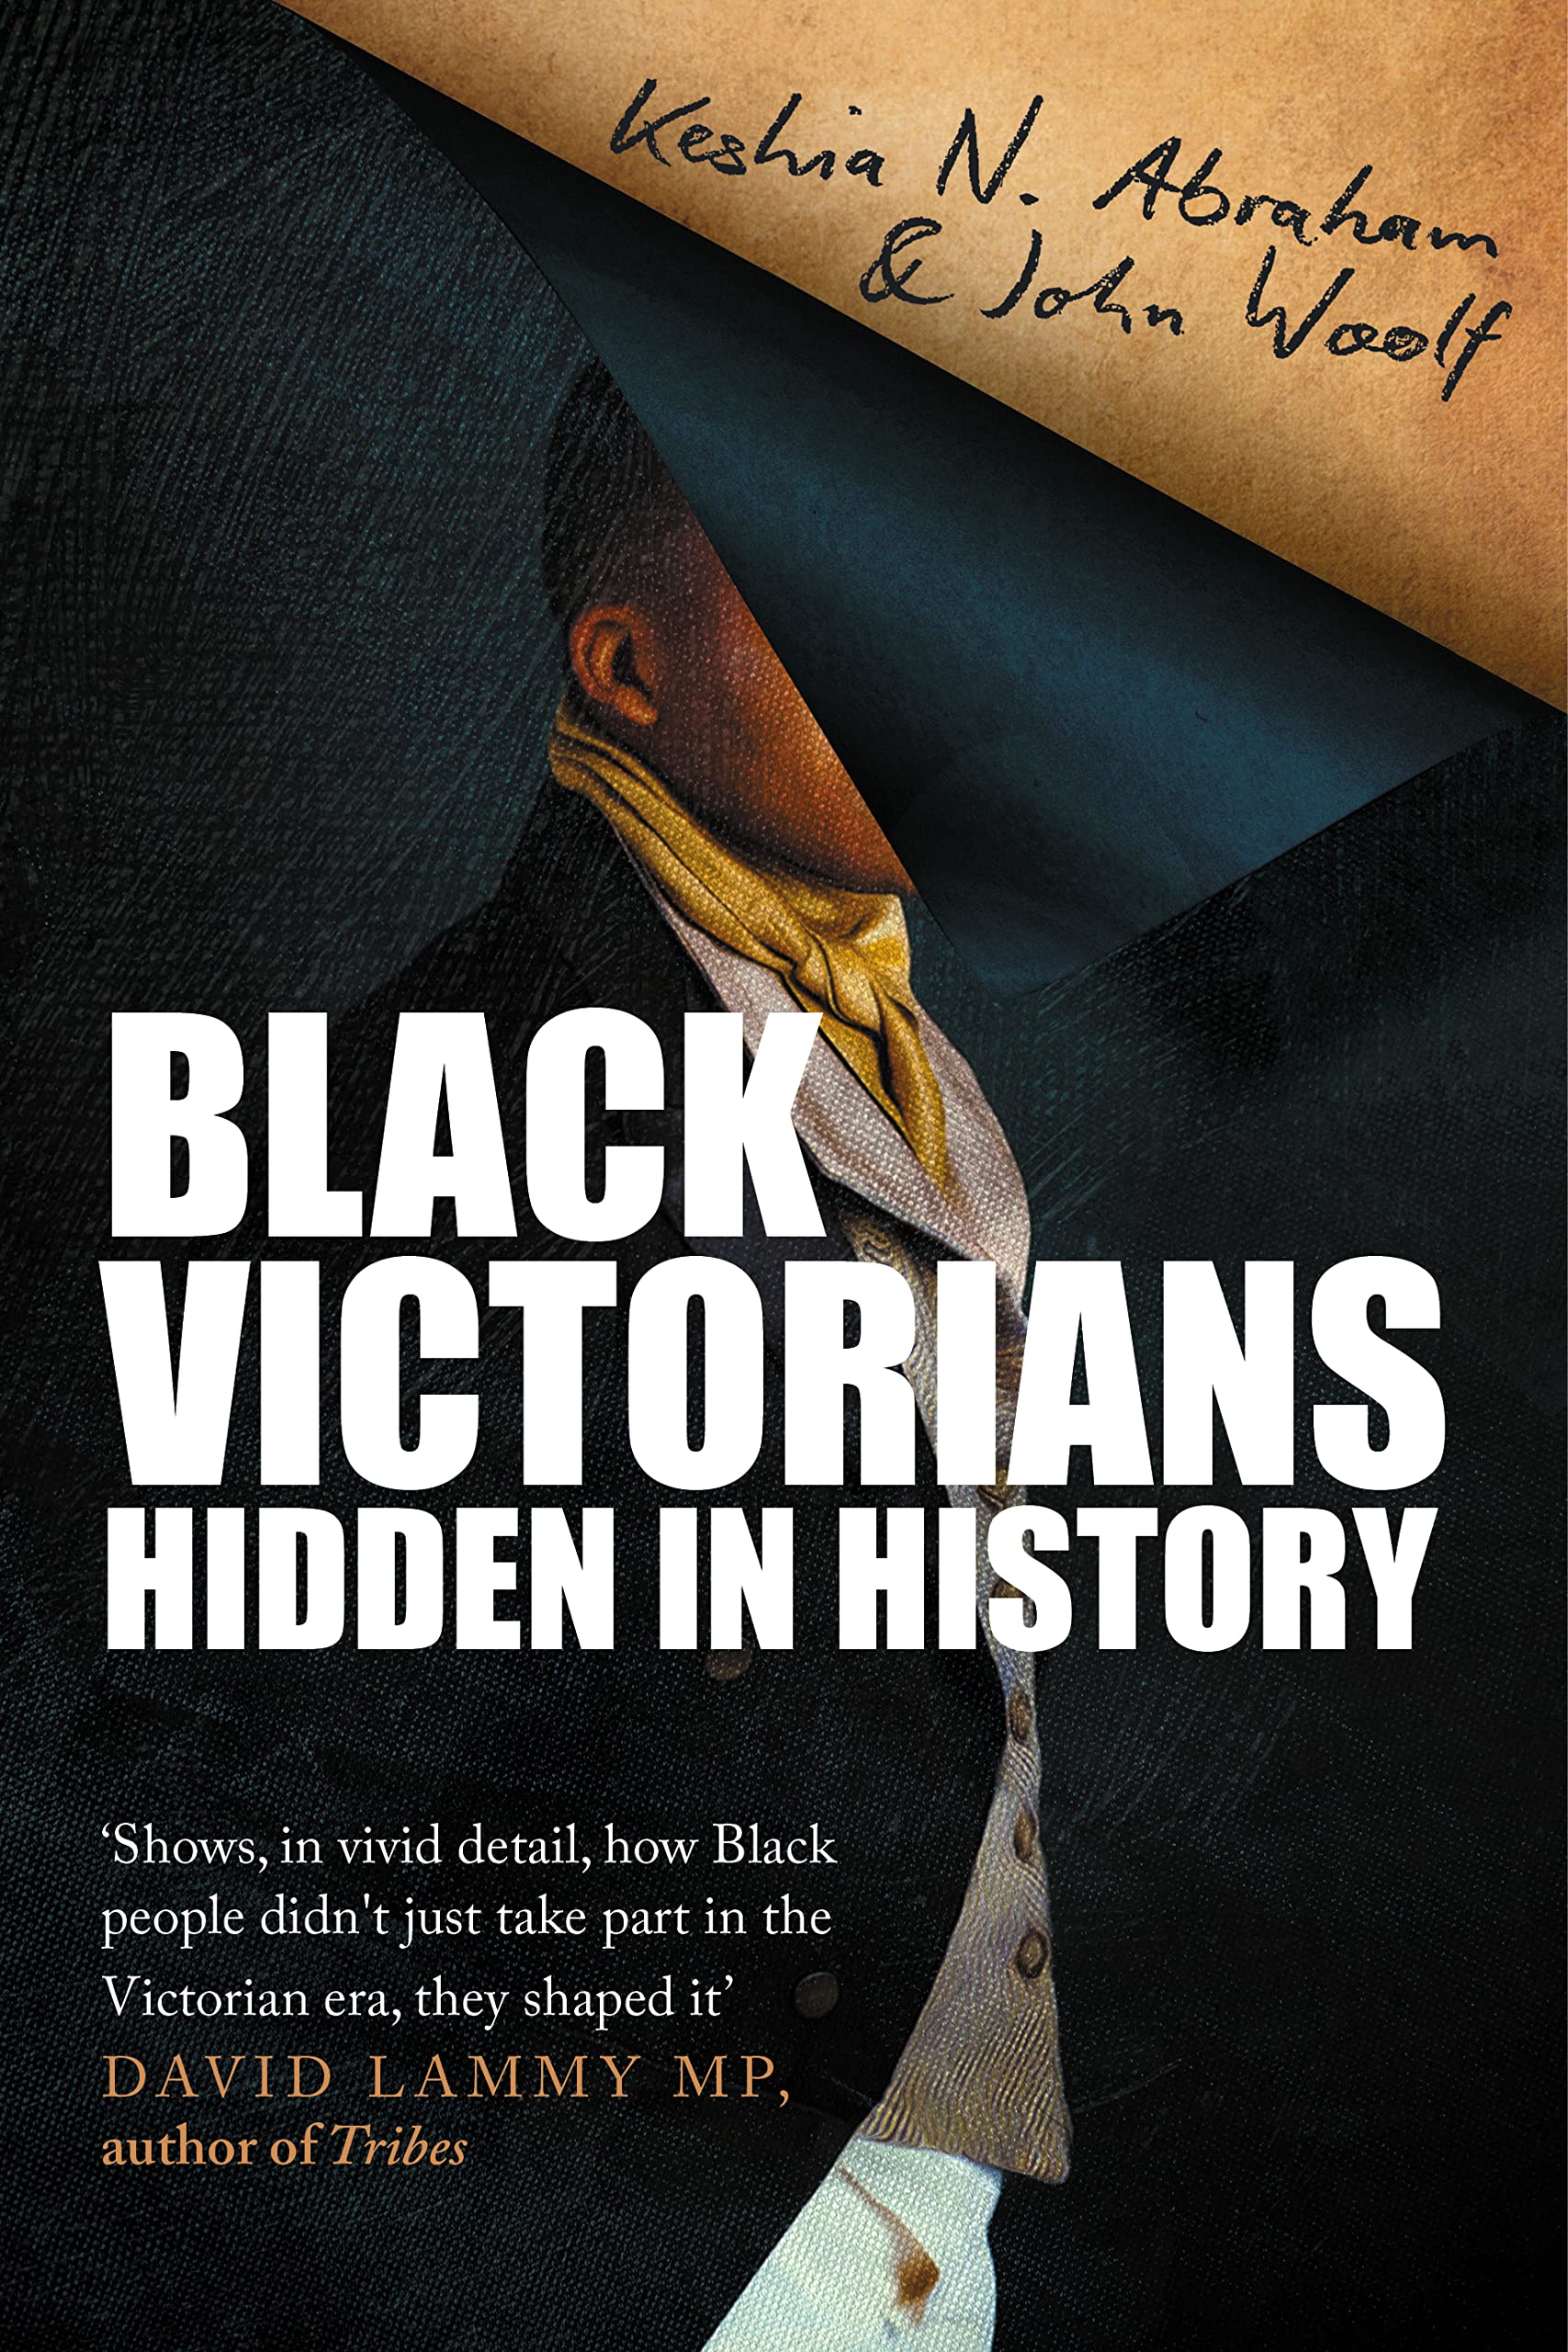 UNHEARD STORIES: A new book looks at the huge role played by the Black community in Victorian life